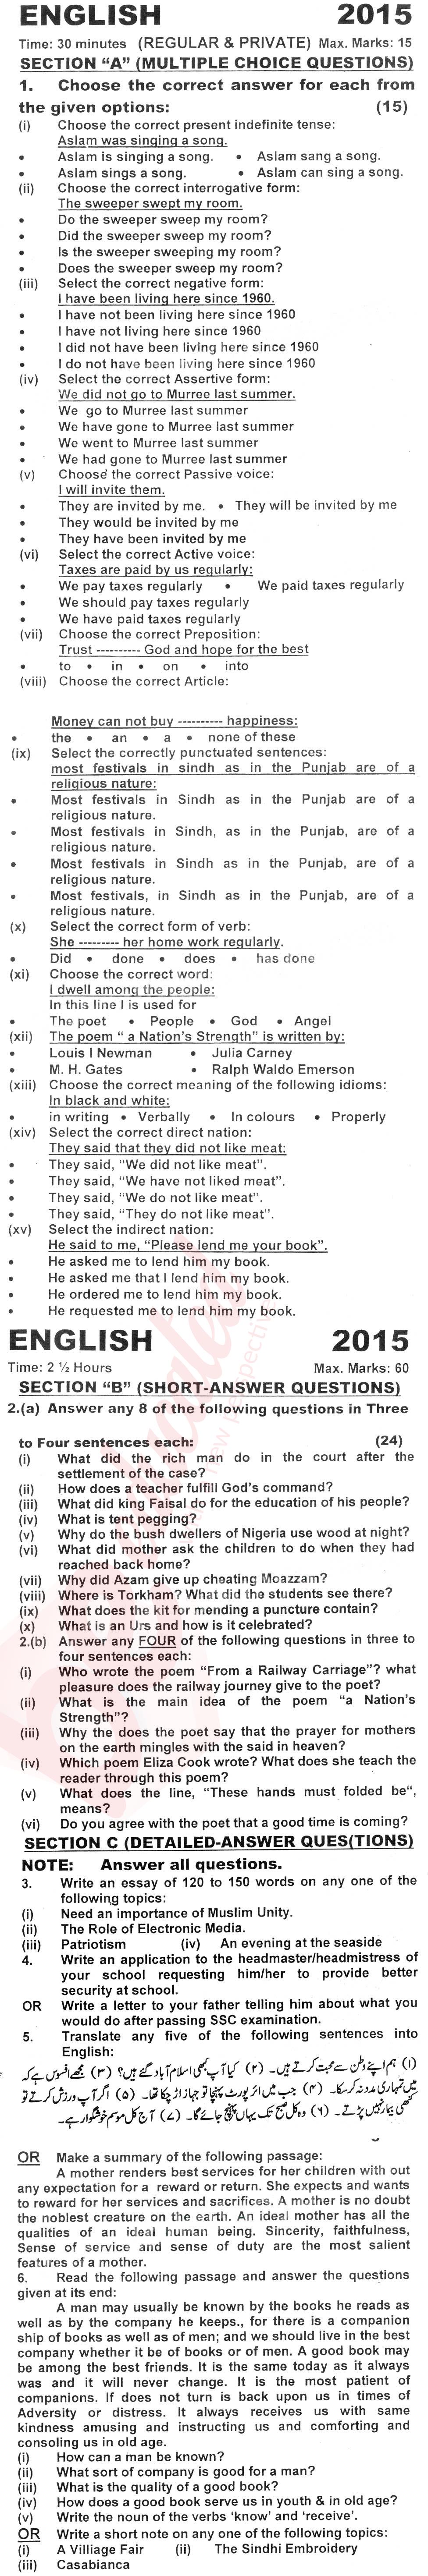 English 10th class Past Paper Group 1 KPBTE 2015